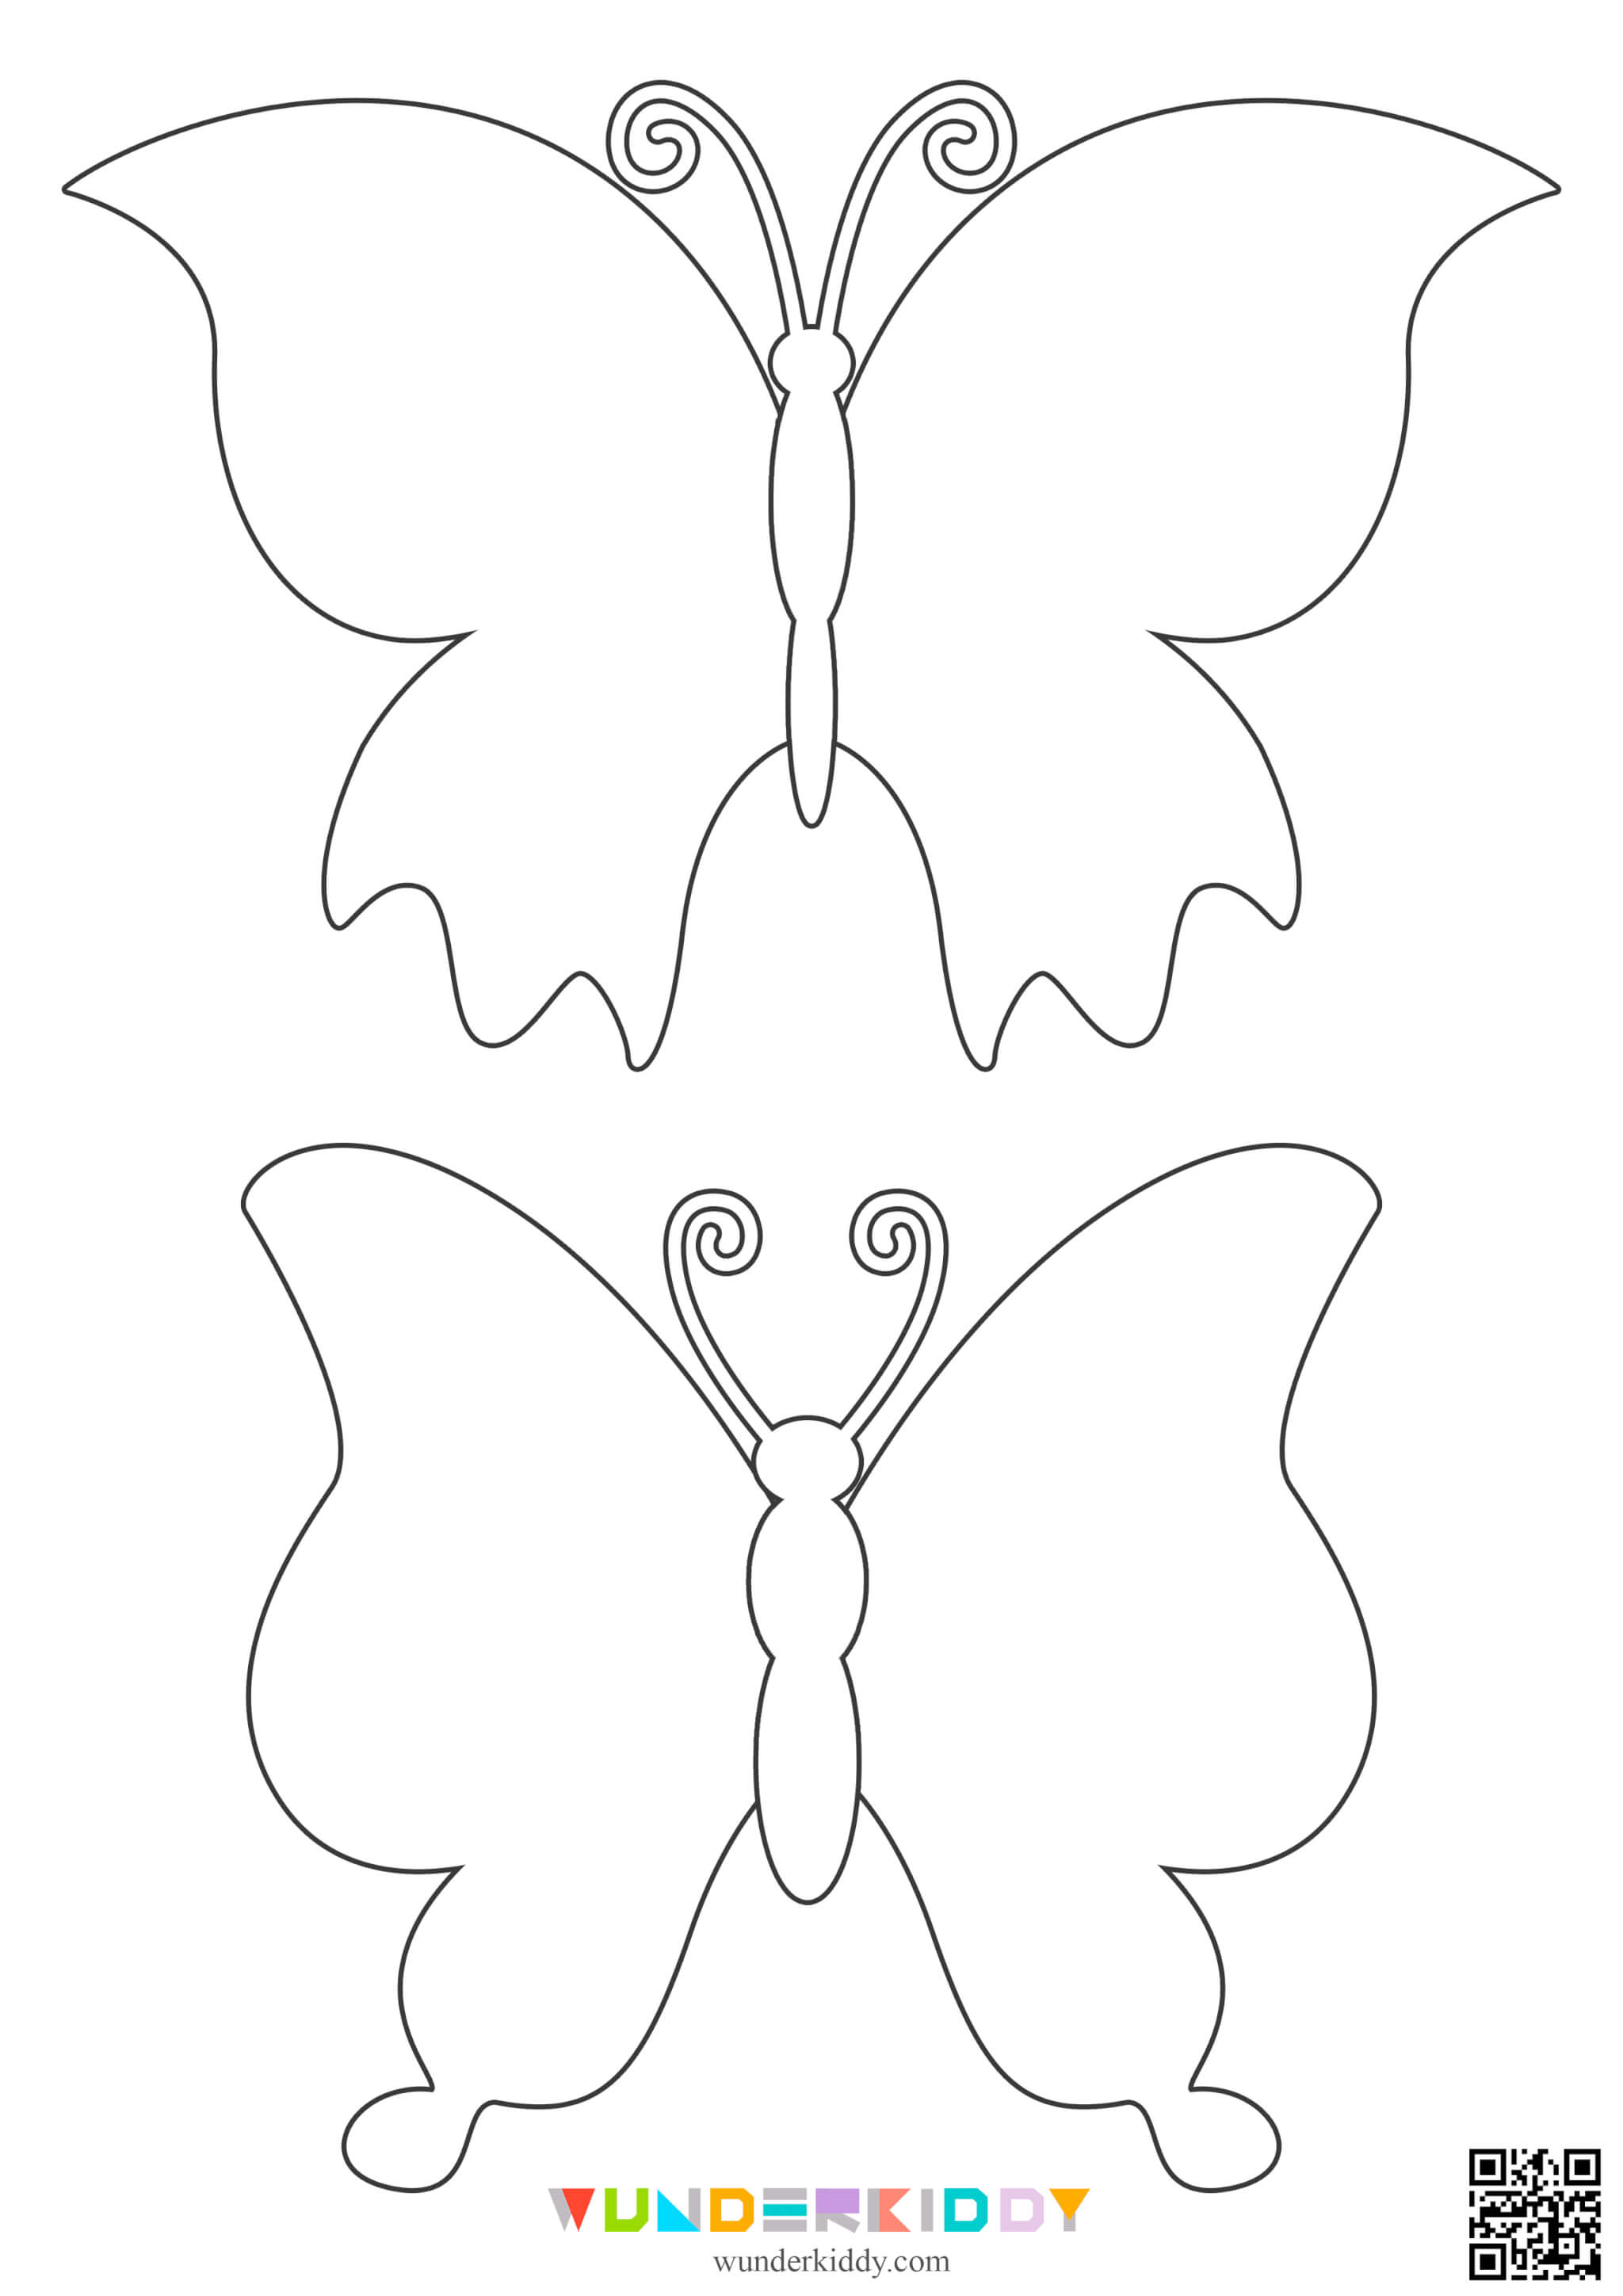 Template «Butterfly» - Image 7